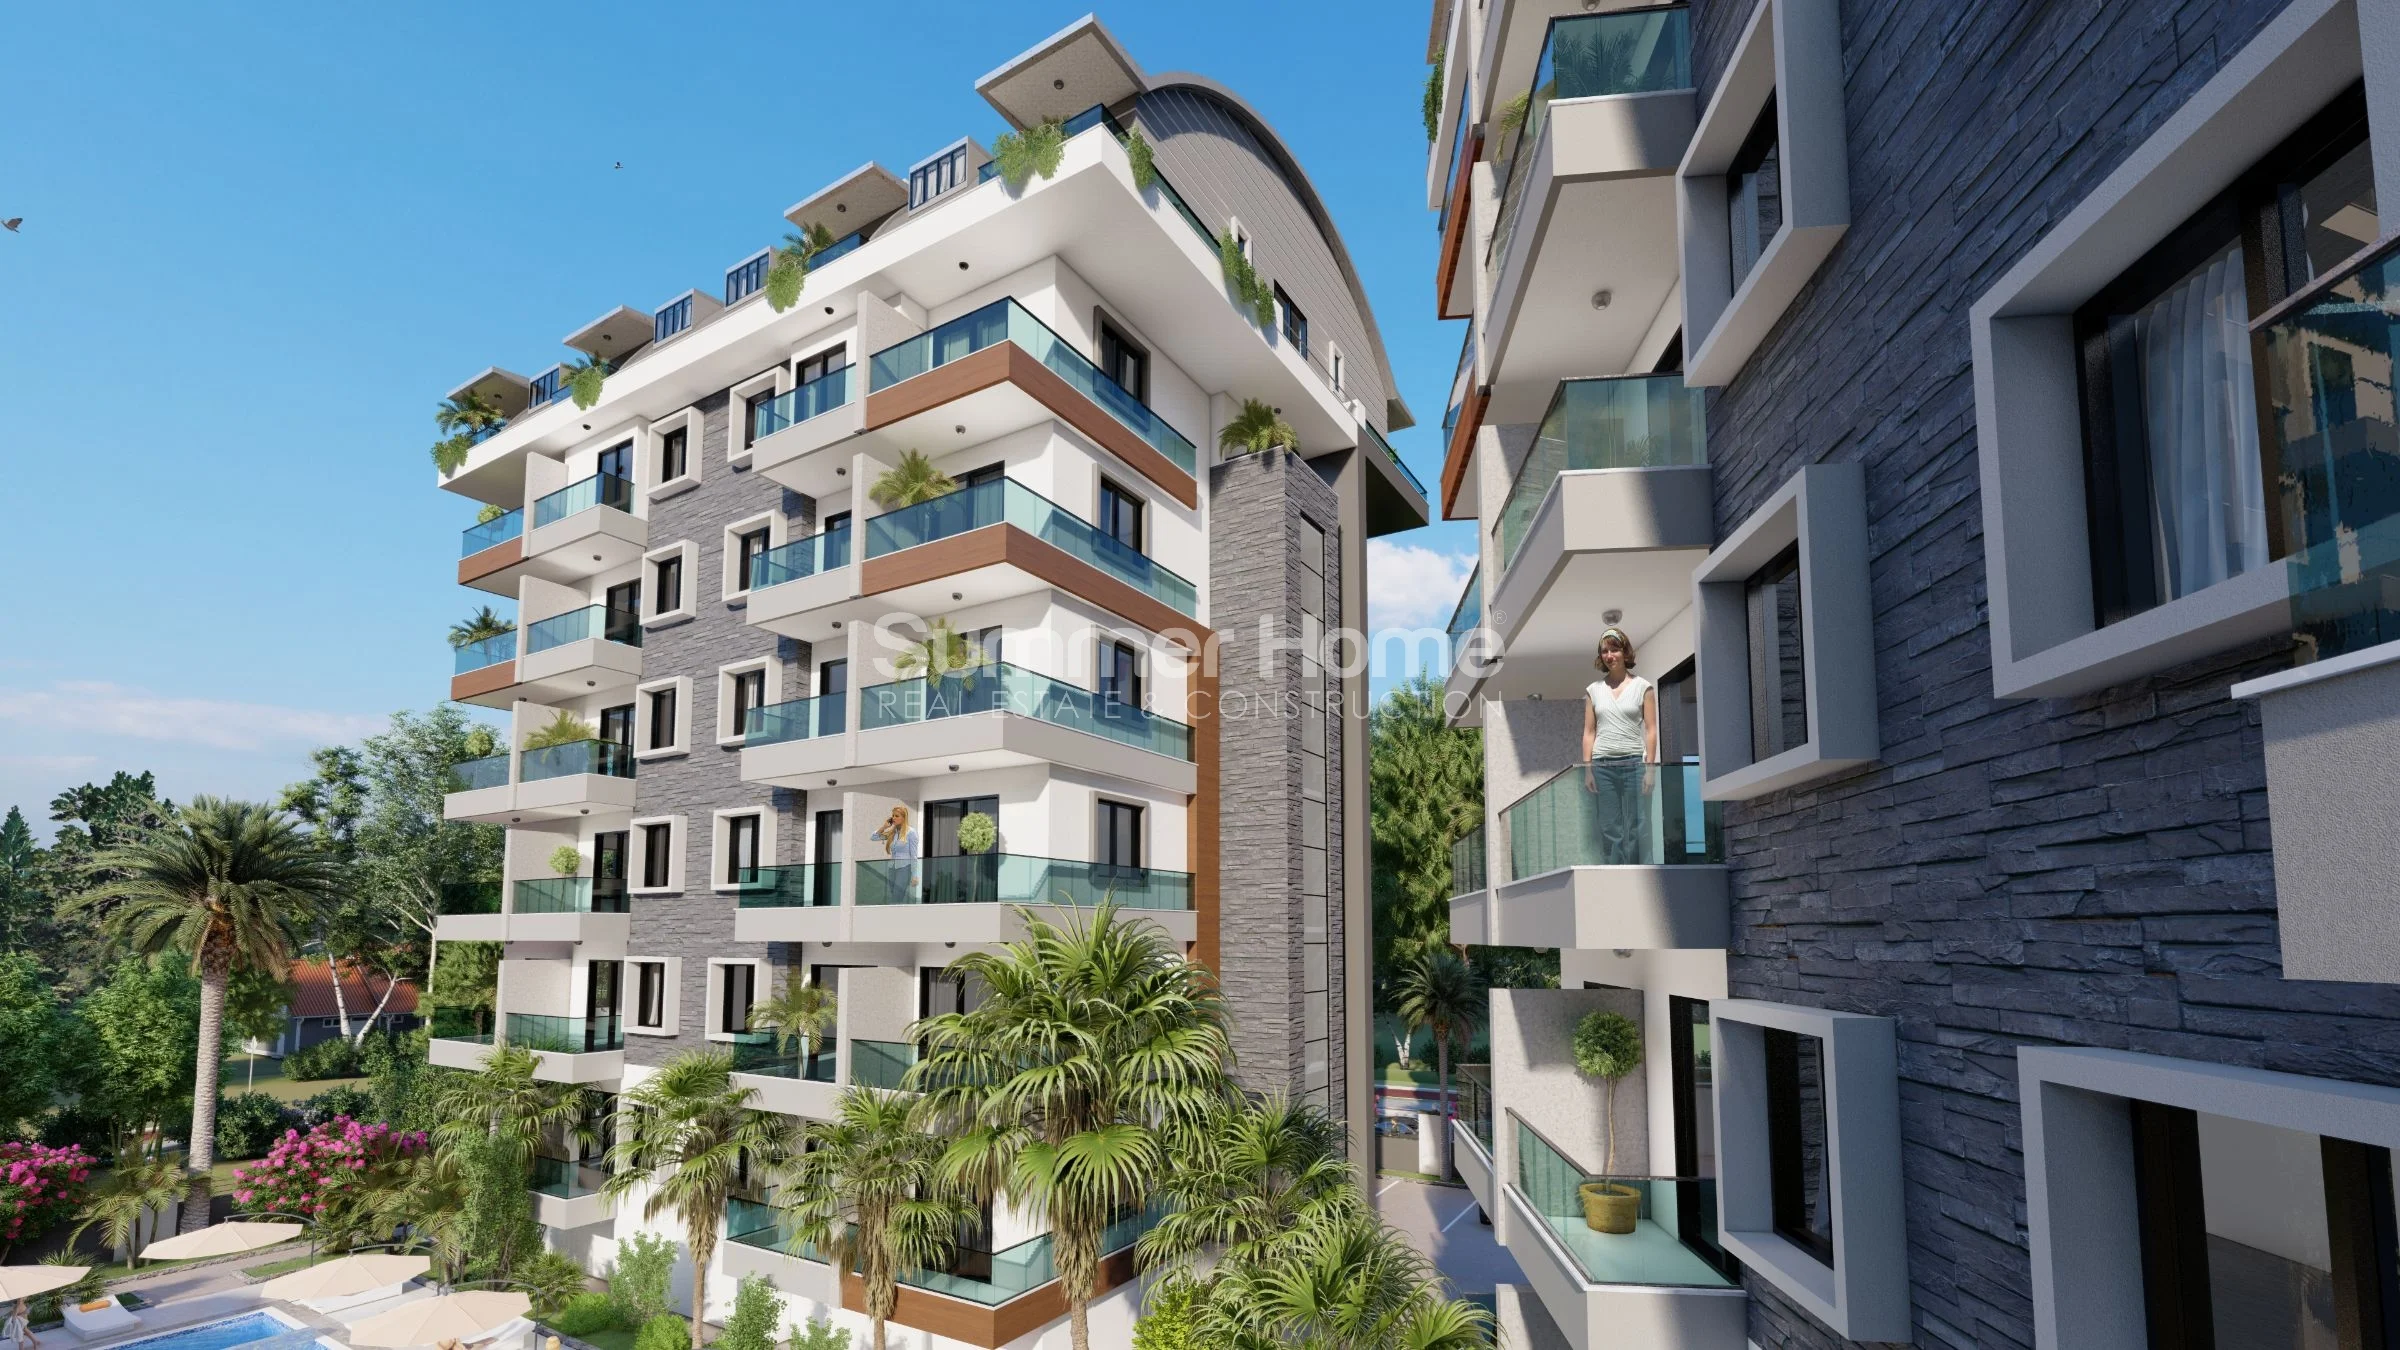 Modern Holiday Flats For Sale in Up-and-Coming Gazipasa general - 14